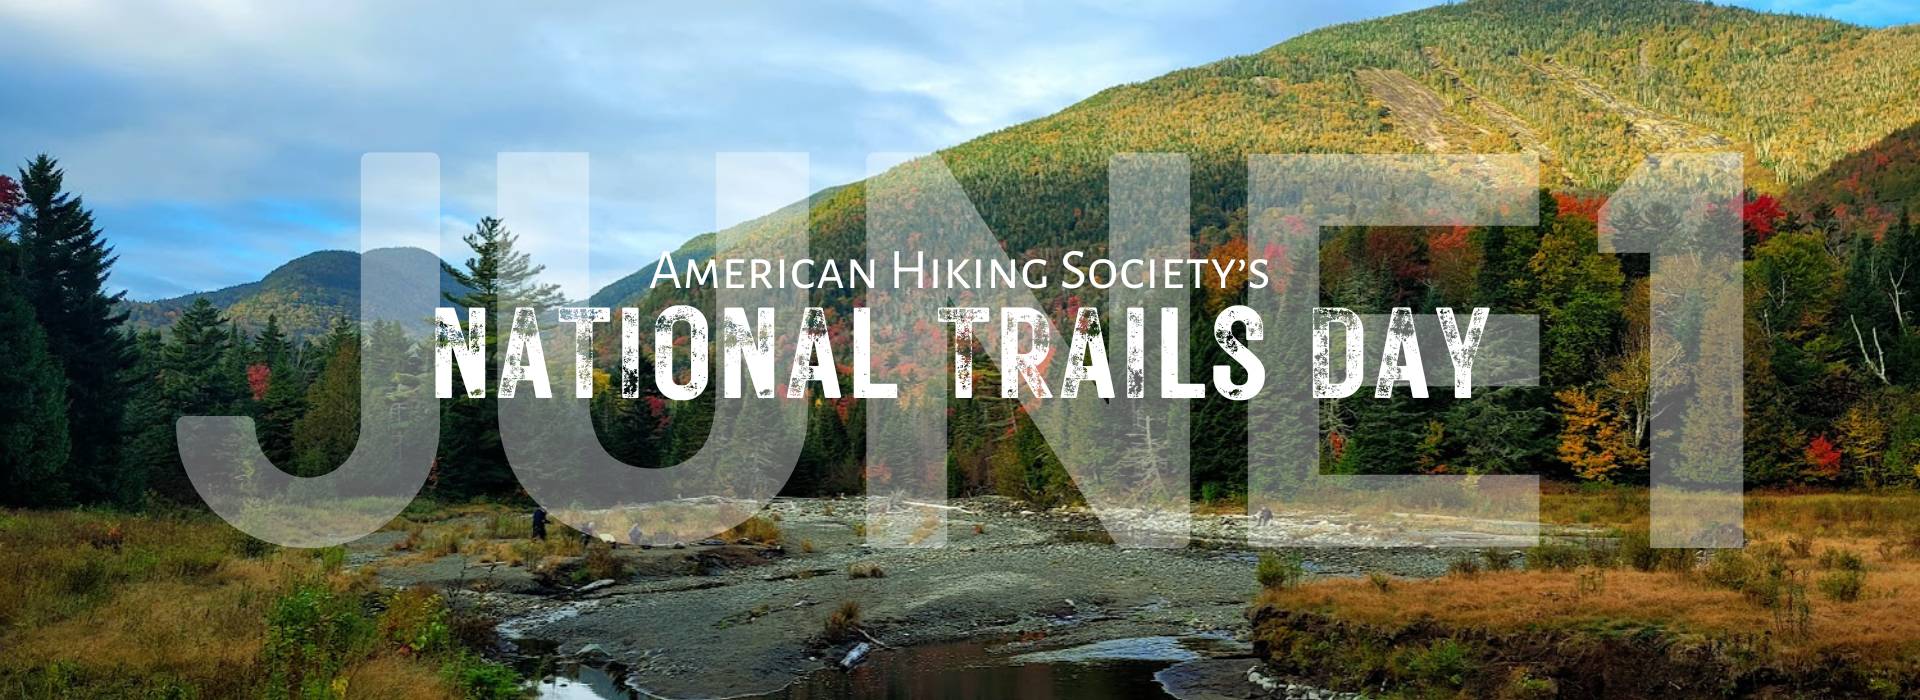 National Trails Day Hike June 1